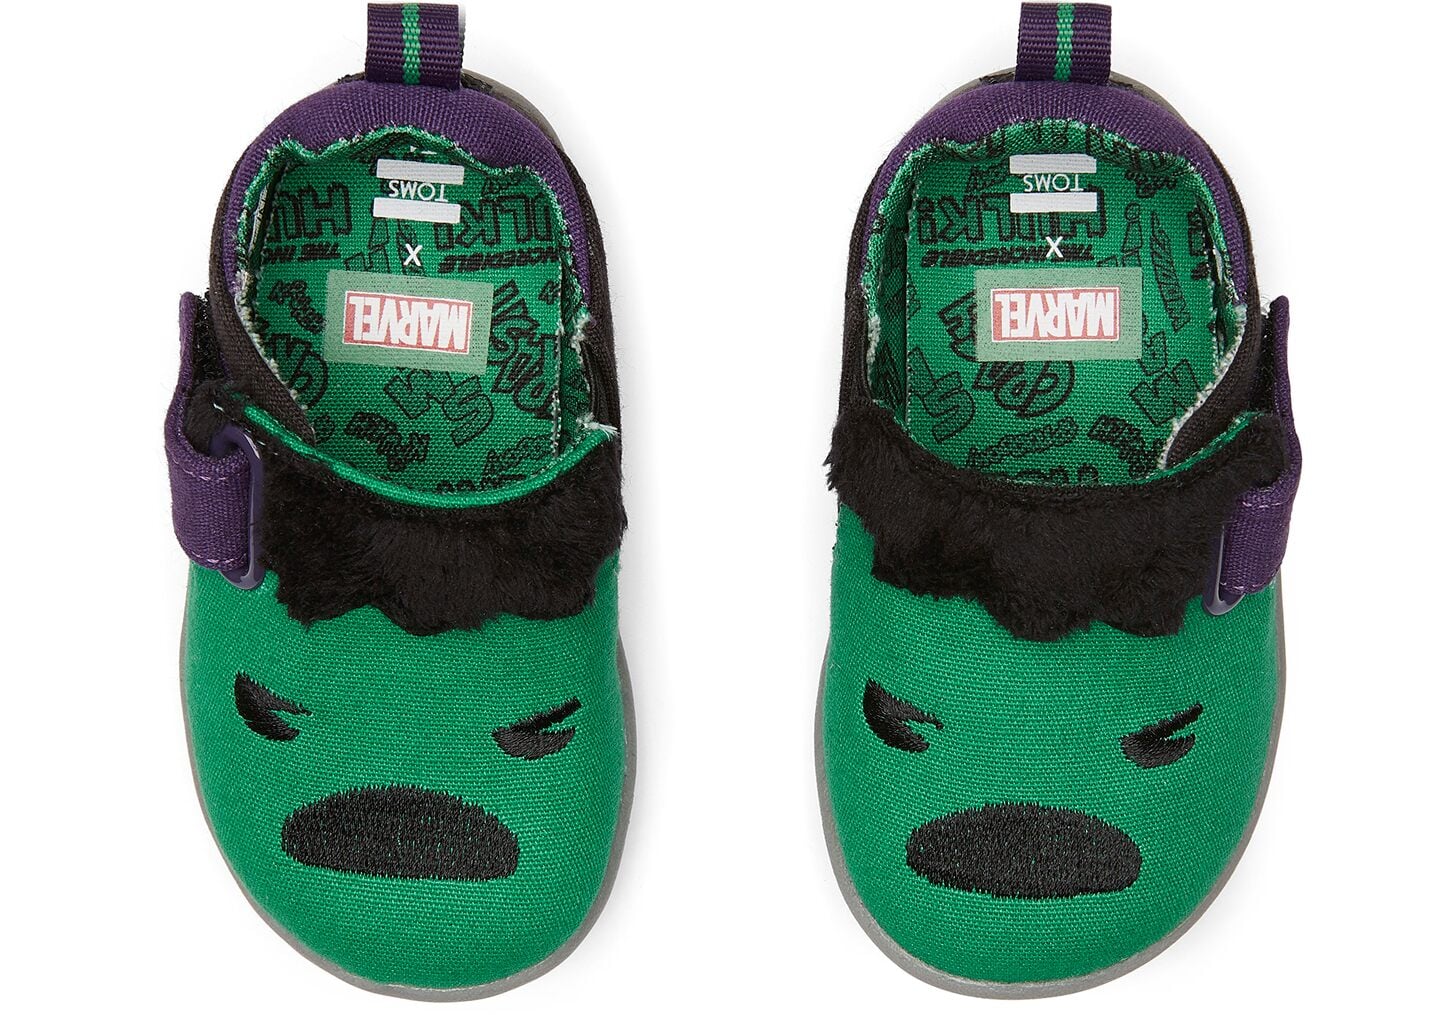 hulk shoes for adults